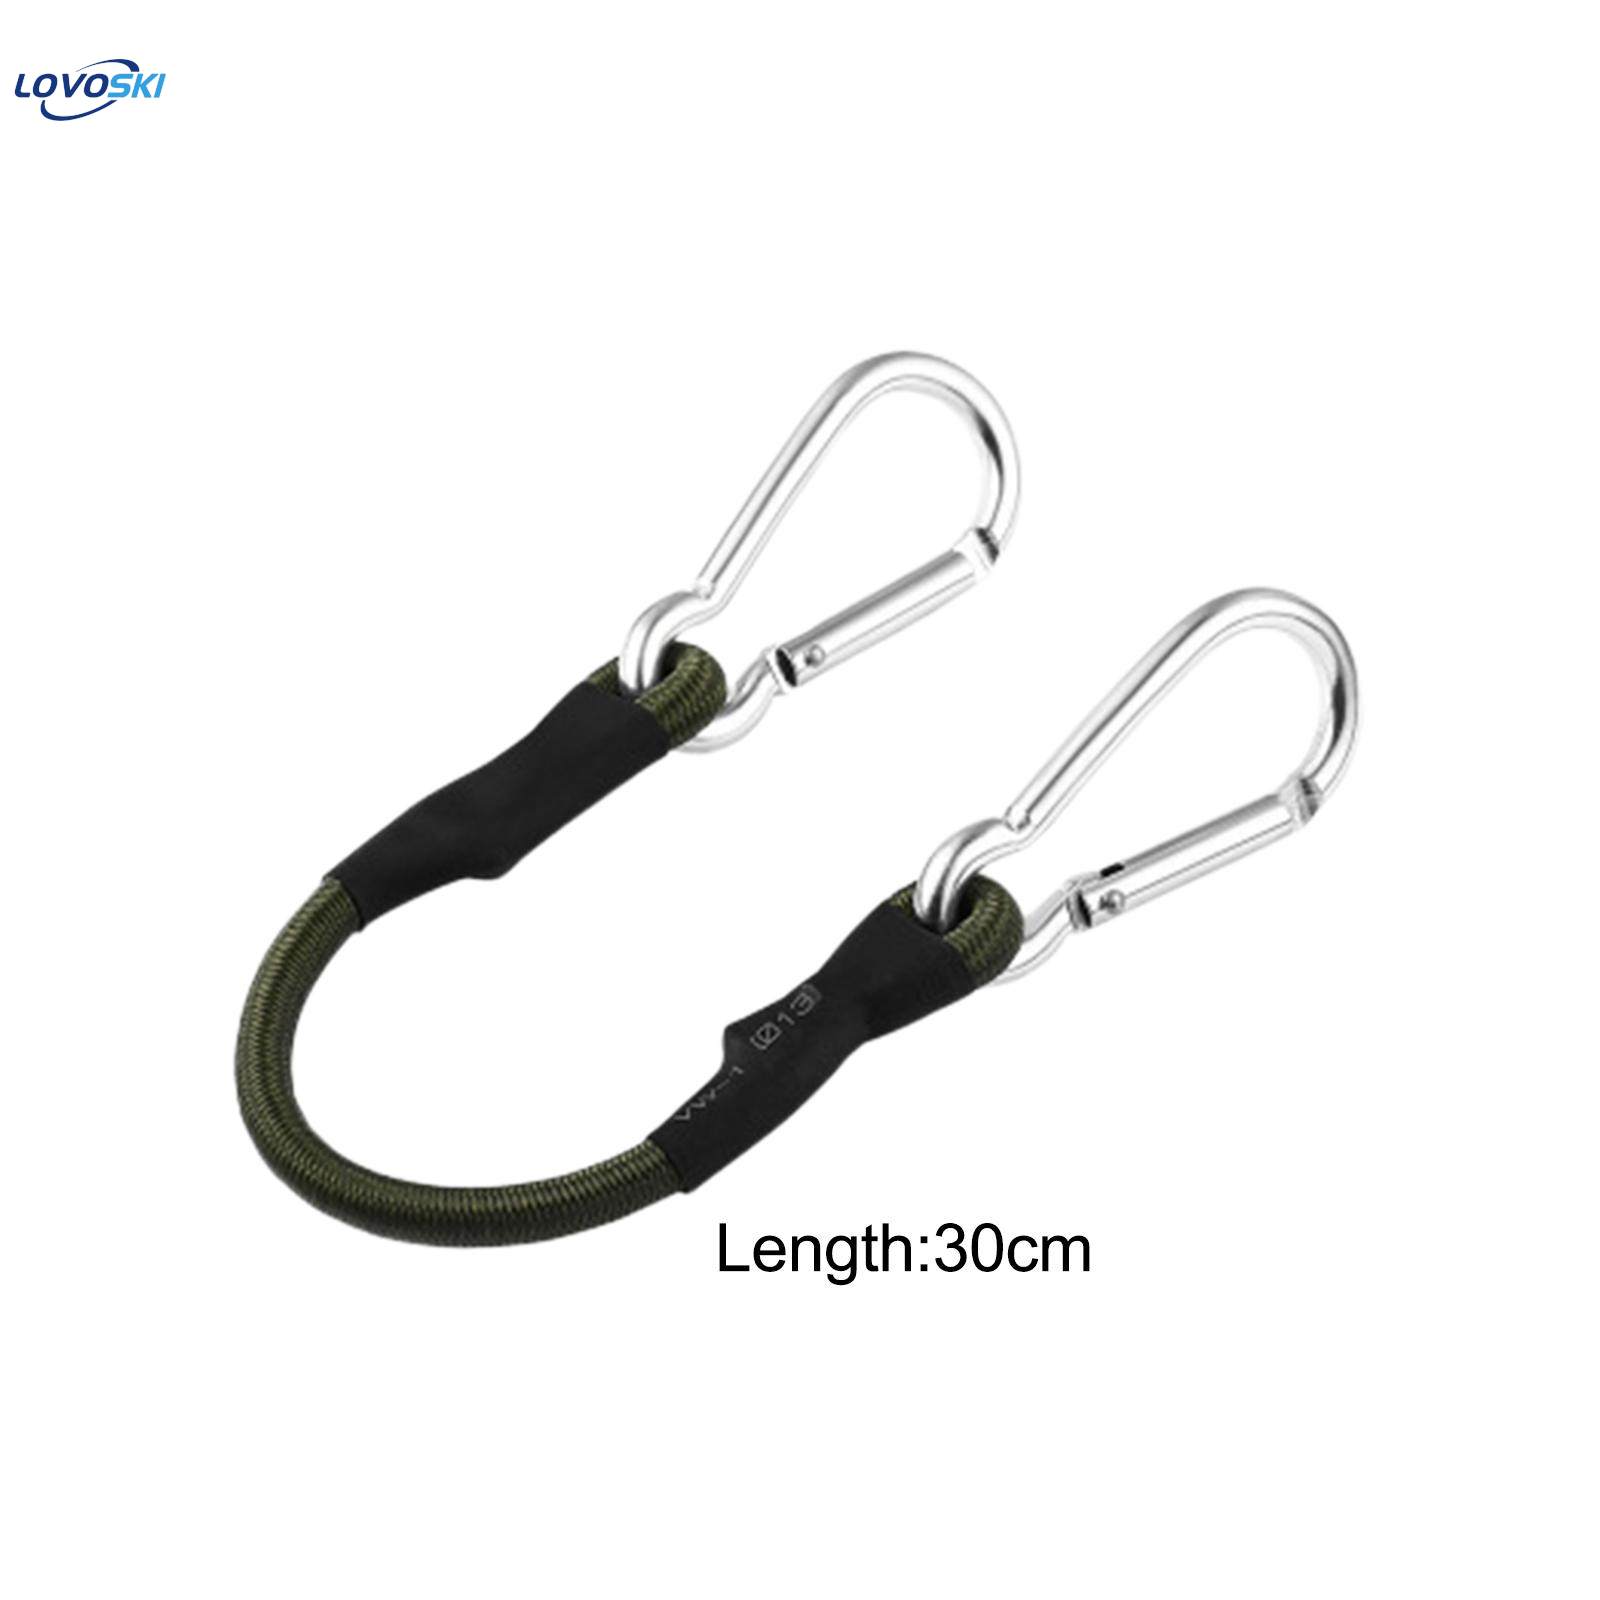 Bungee Cords with Carabiner Strong Cable for Motorcycle Caravans